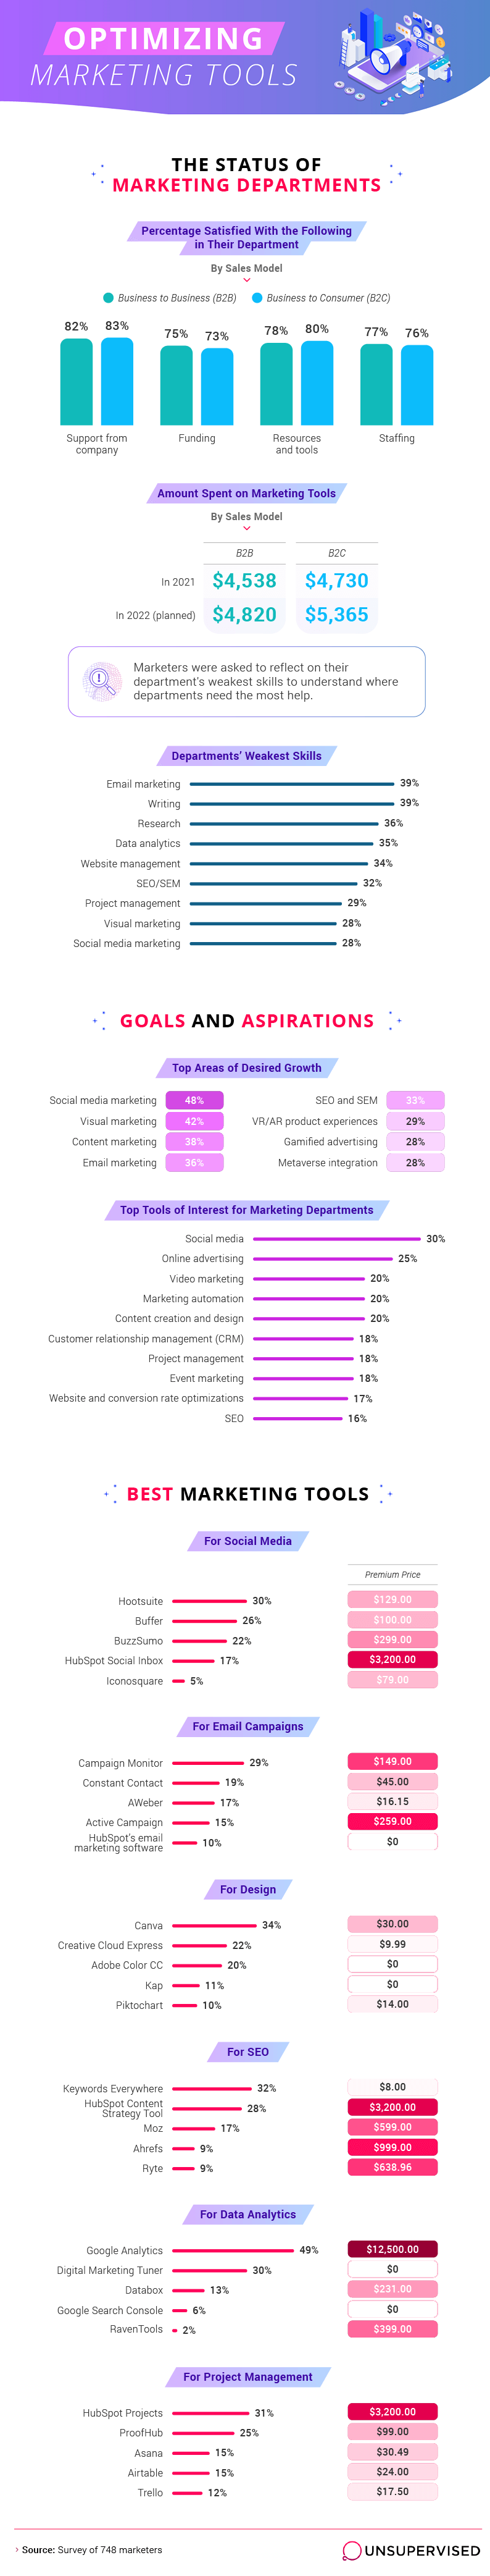 Infographic of key challenges and apps for marketers - Digital Marketing